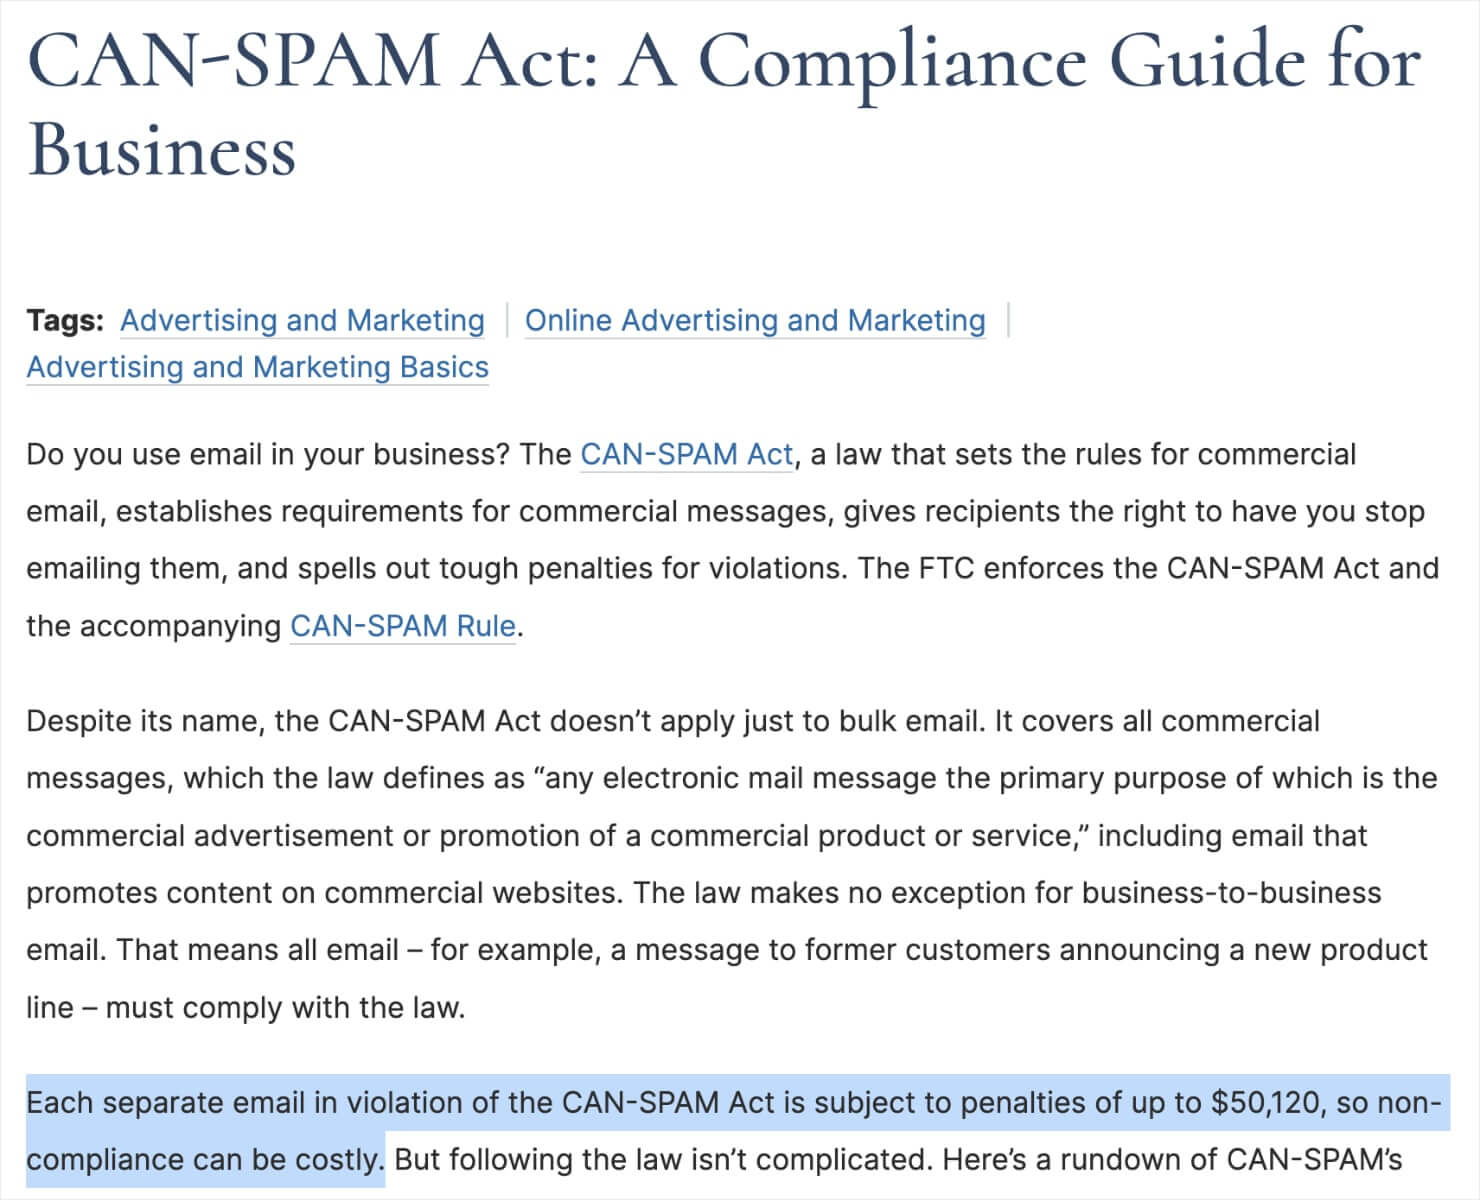 CAN-SPAM Act Laws and Requirements